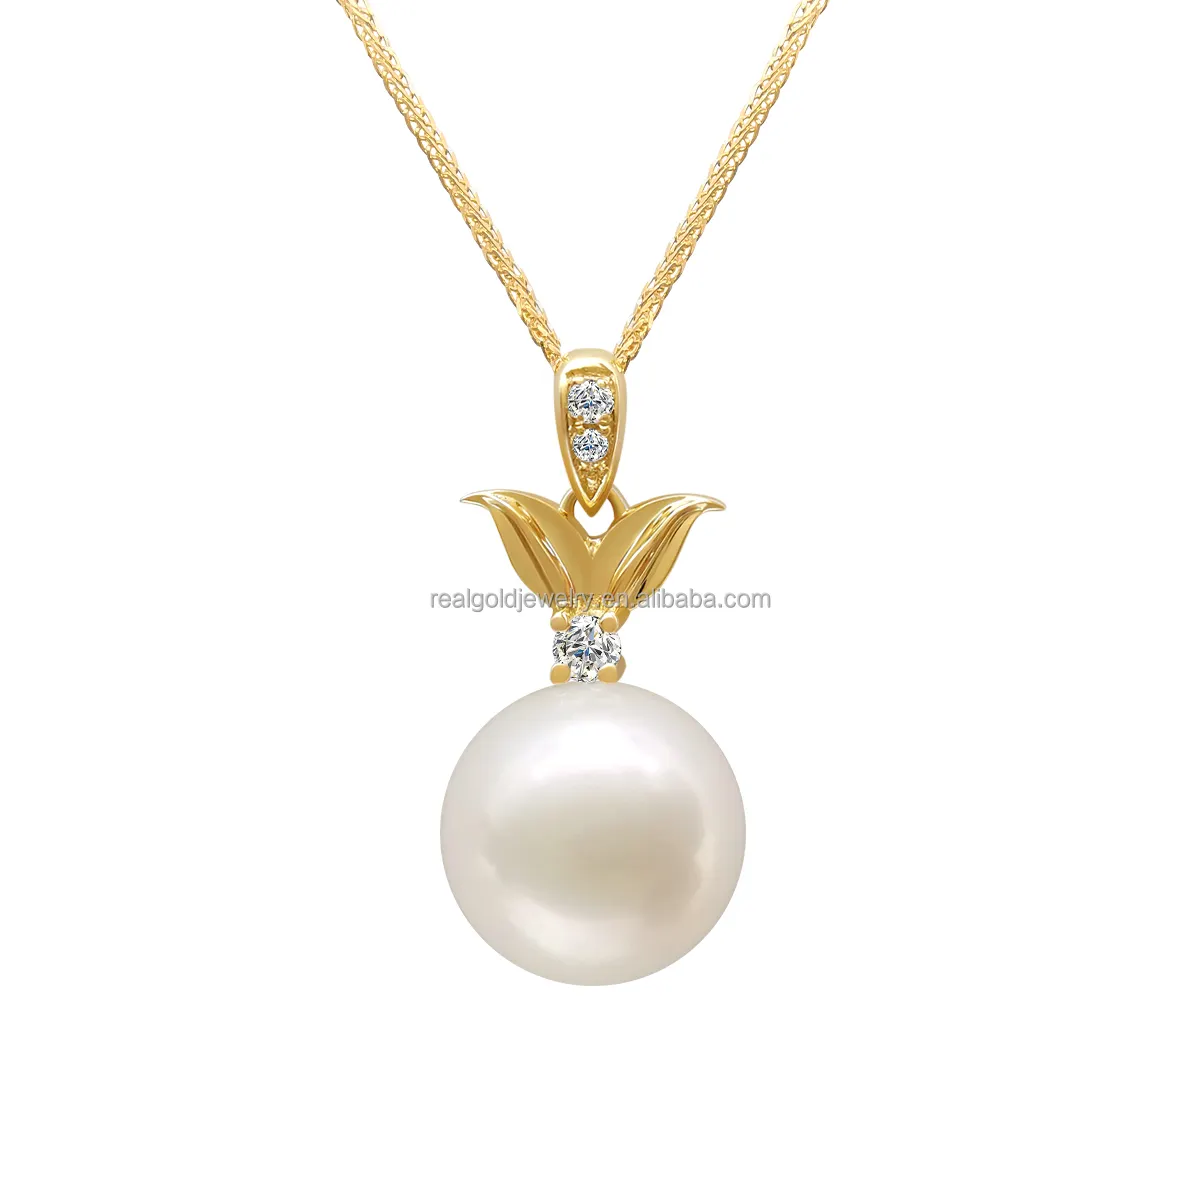 Genuine 14K Gold Freshwater Pearl Pendant Necklace Elegant Pearl Necklace Real Gold Fine Jewelry Necklace